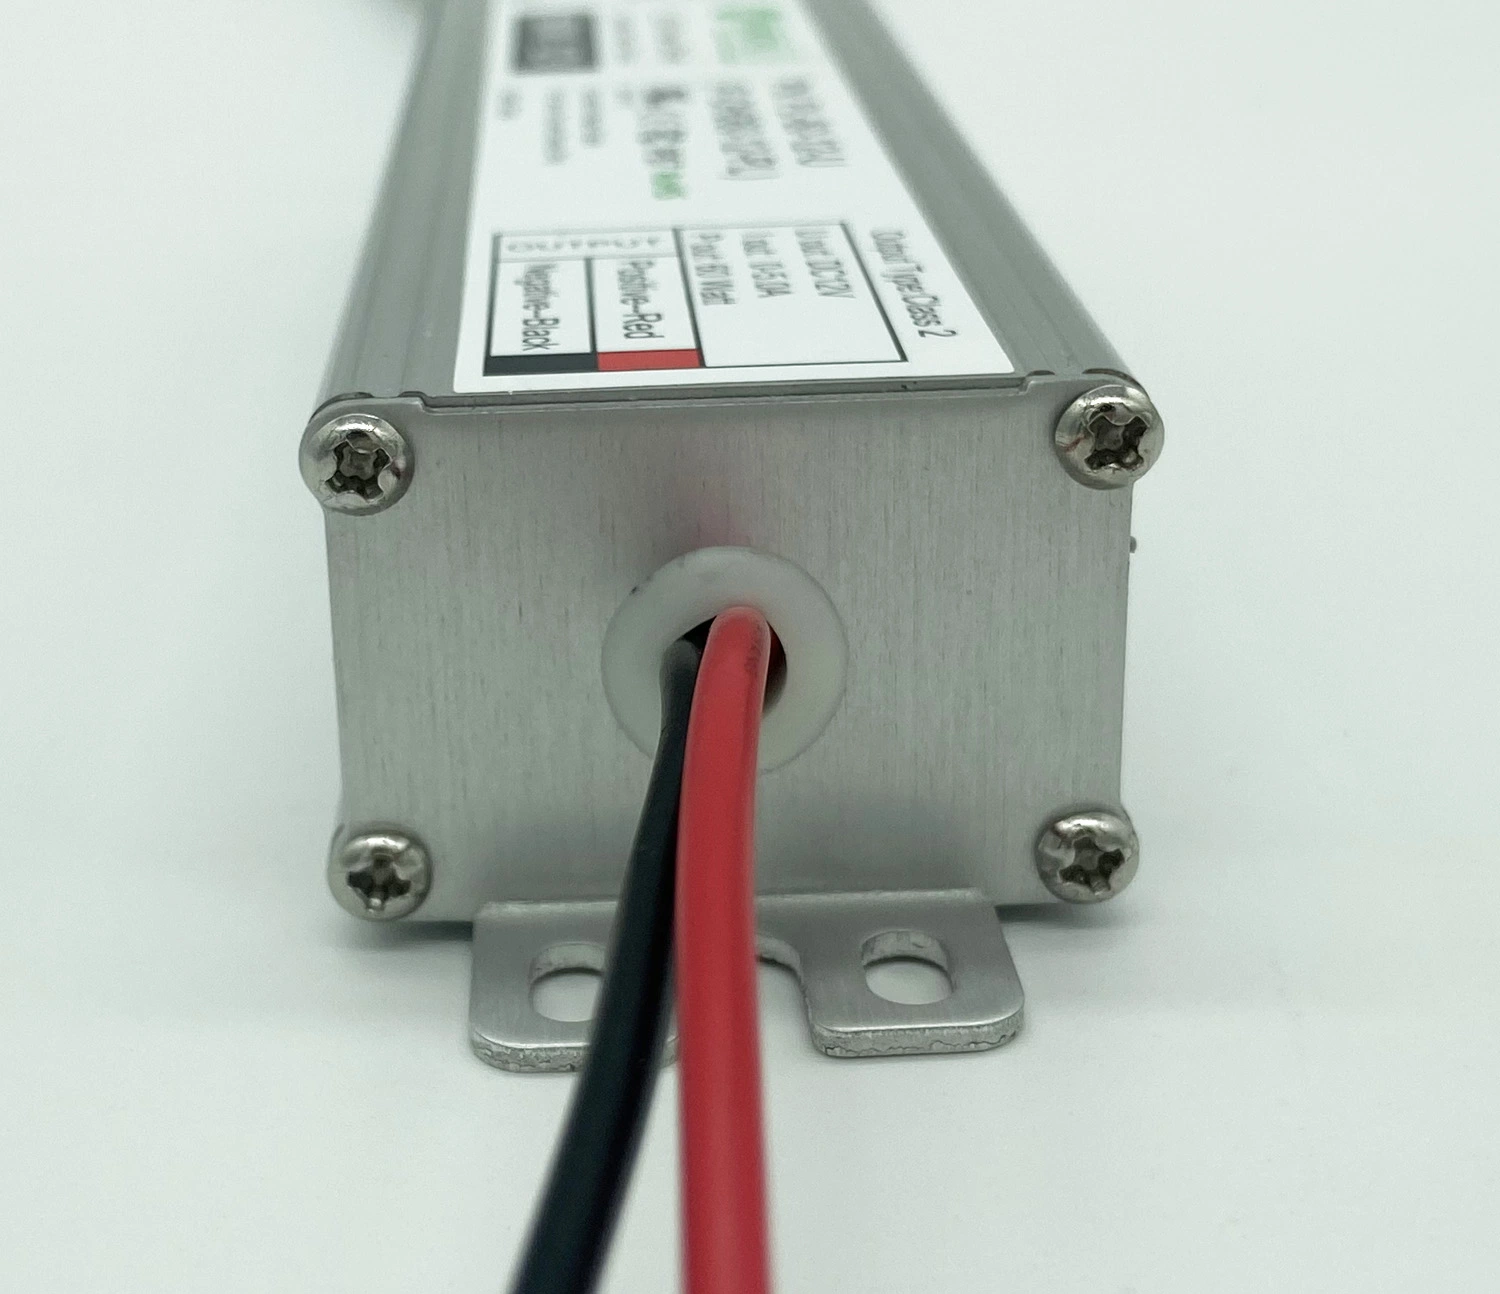 Selv 60W 36V High Reliability Compact Enclosure DC Output LED Light Driver for Outdoor LED Sign with IP67 CE UL